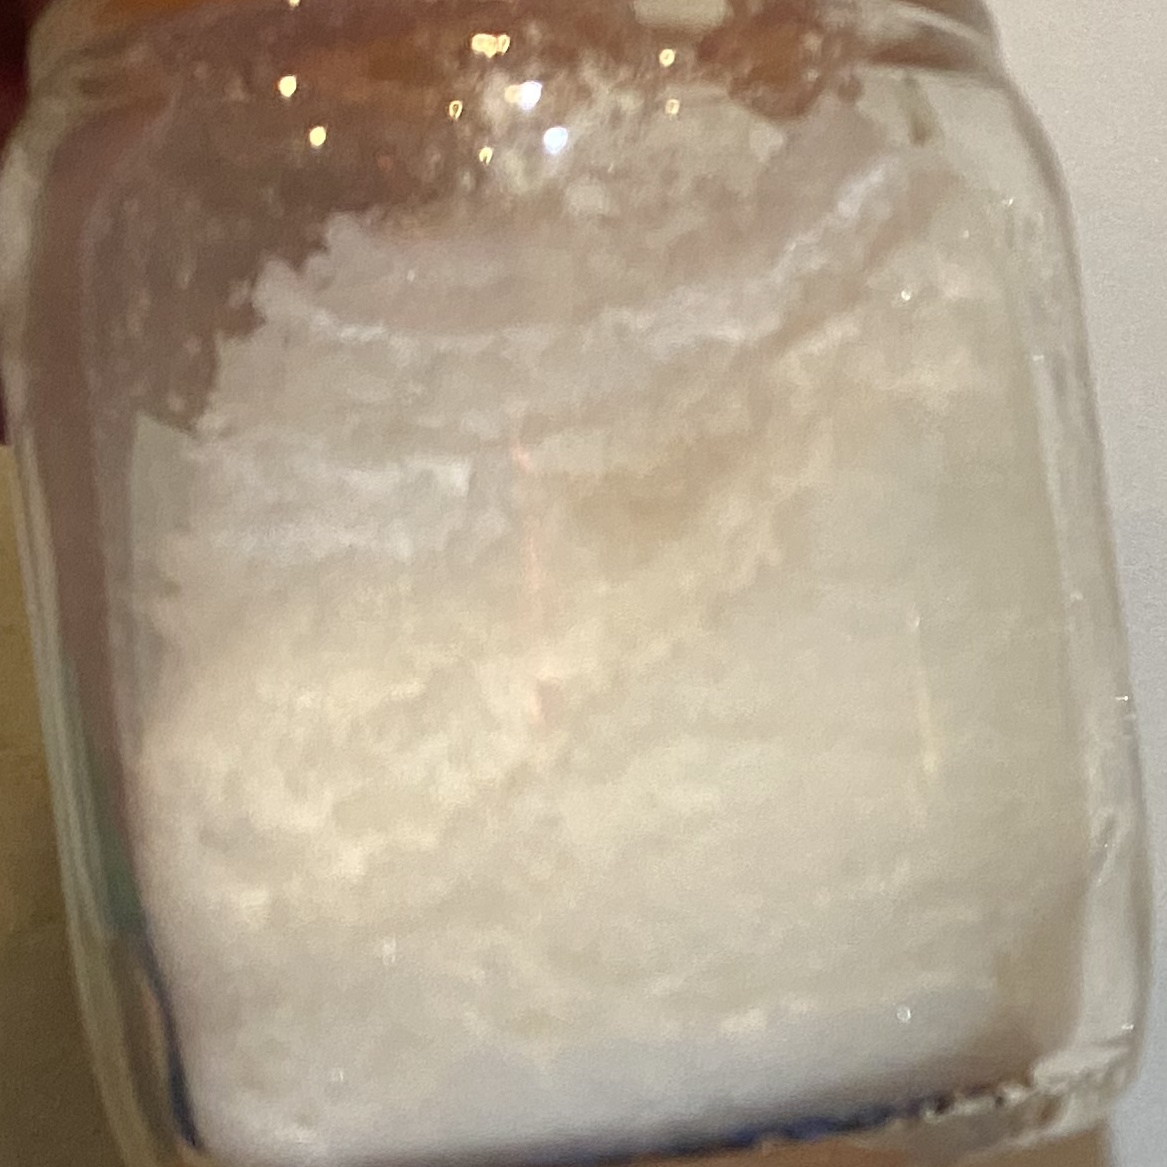 Small glass jar filled with clumpy white power